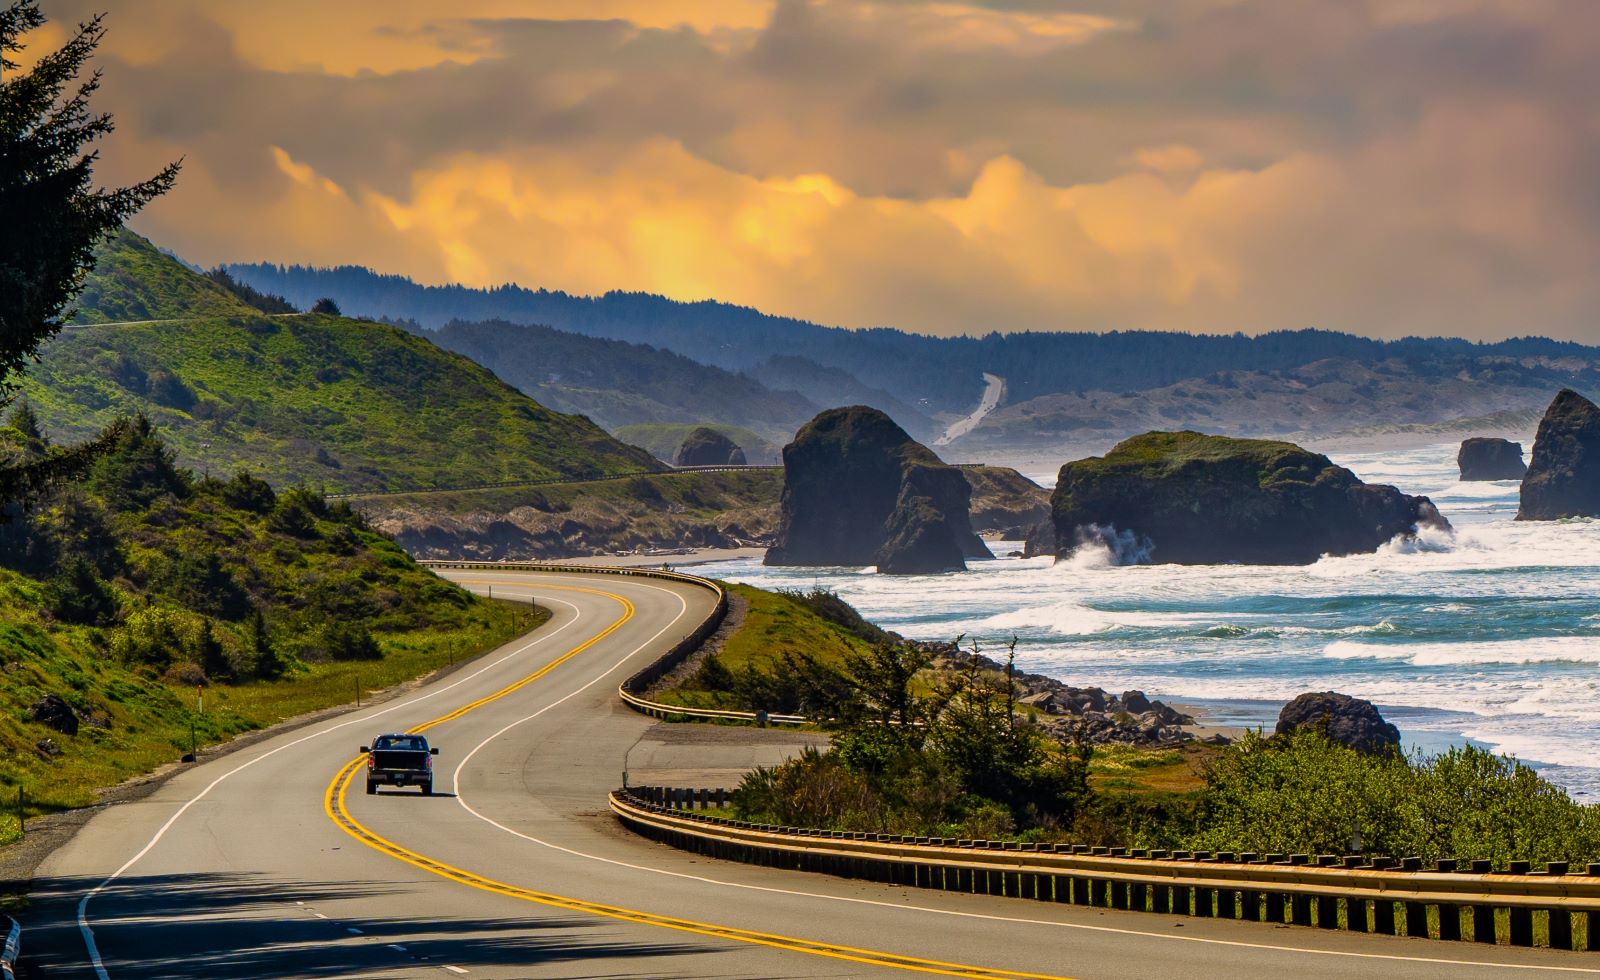 Image credit: Shutterstock / Bob Pool <p>Recommended by a cousin, the Oregon Coast’s rugged beauty is breathtaking. Tip: Many of the small coastal towns offer budget-friendly accommodations with ocean views.</p>